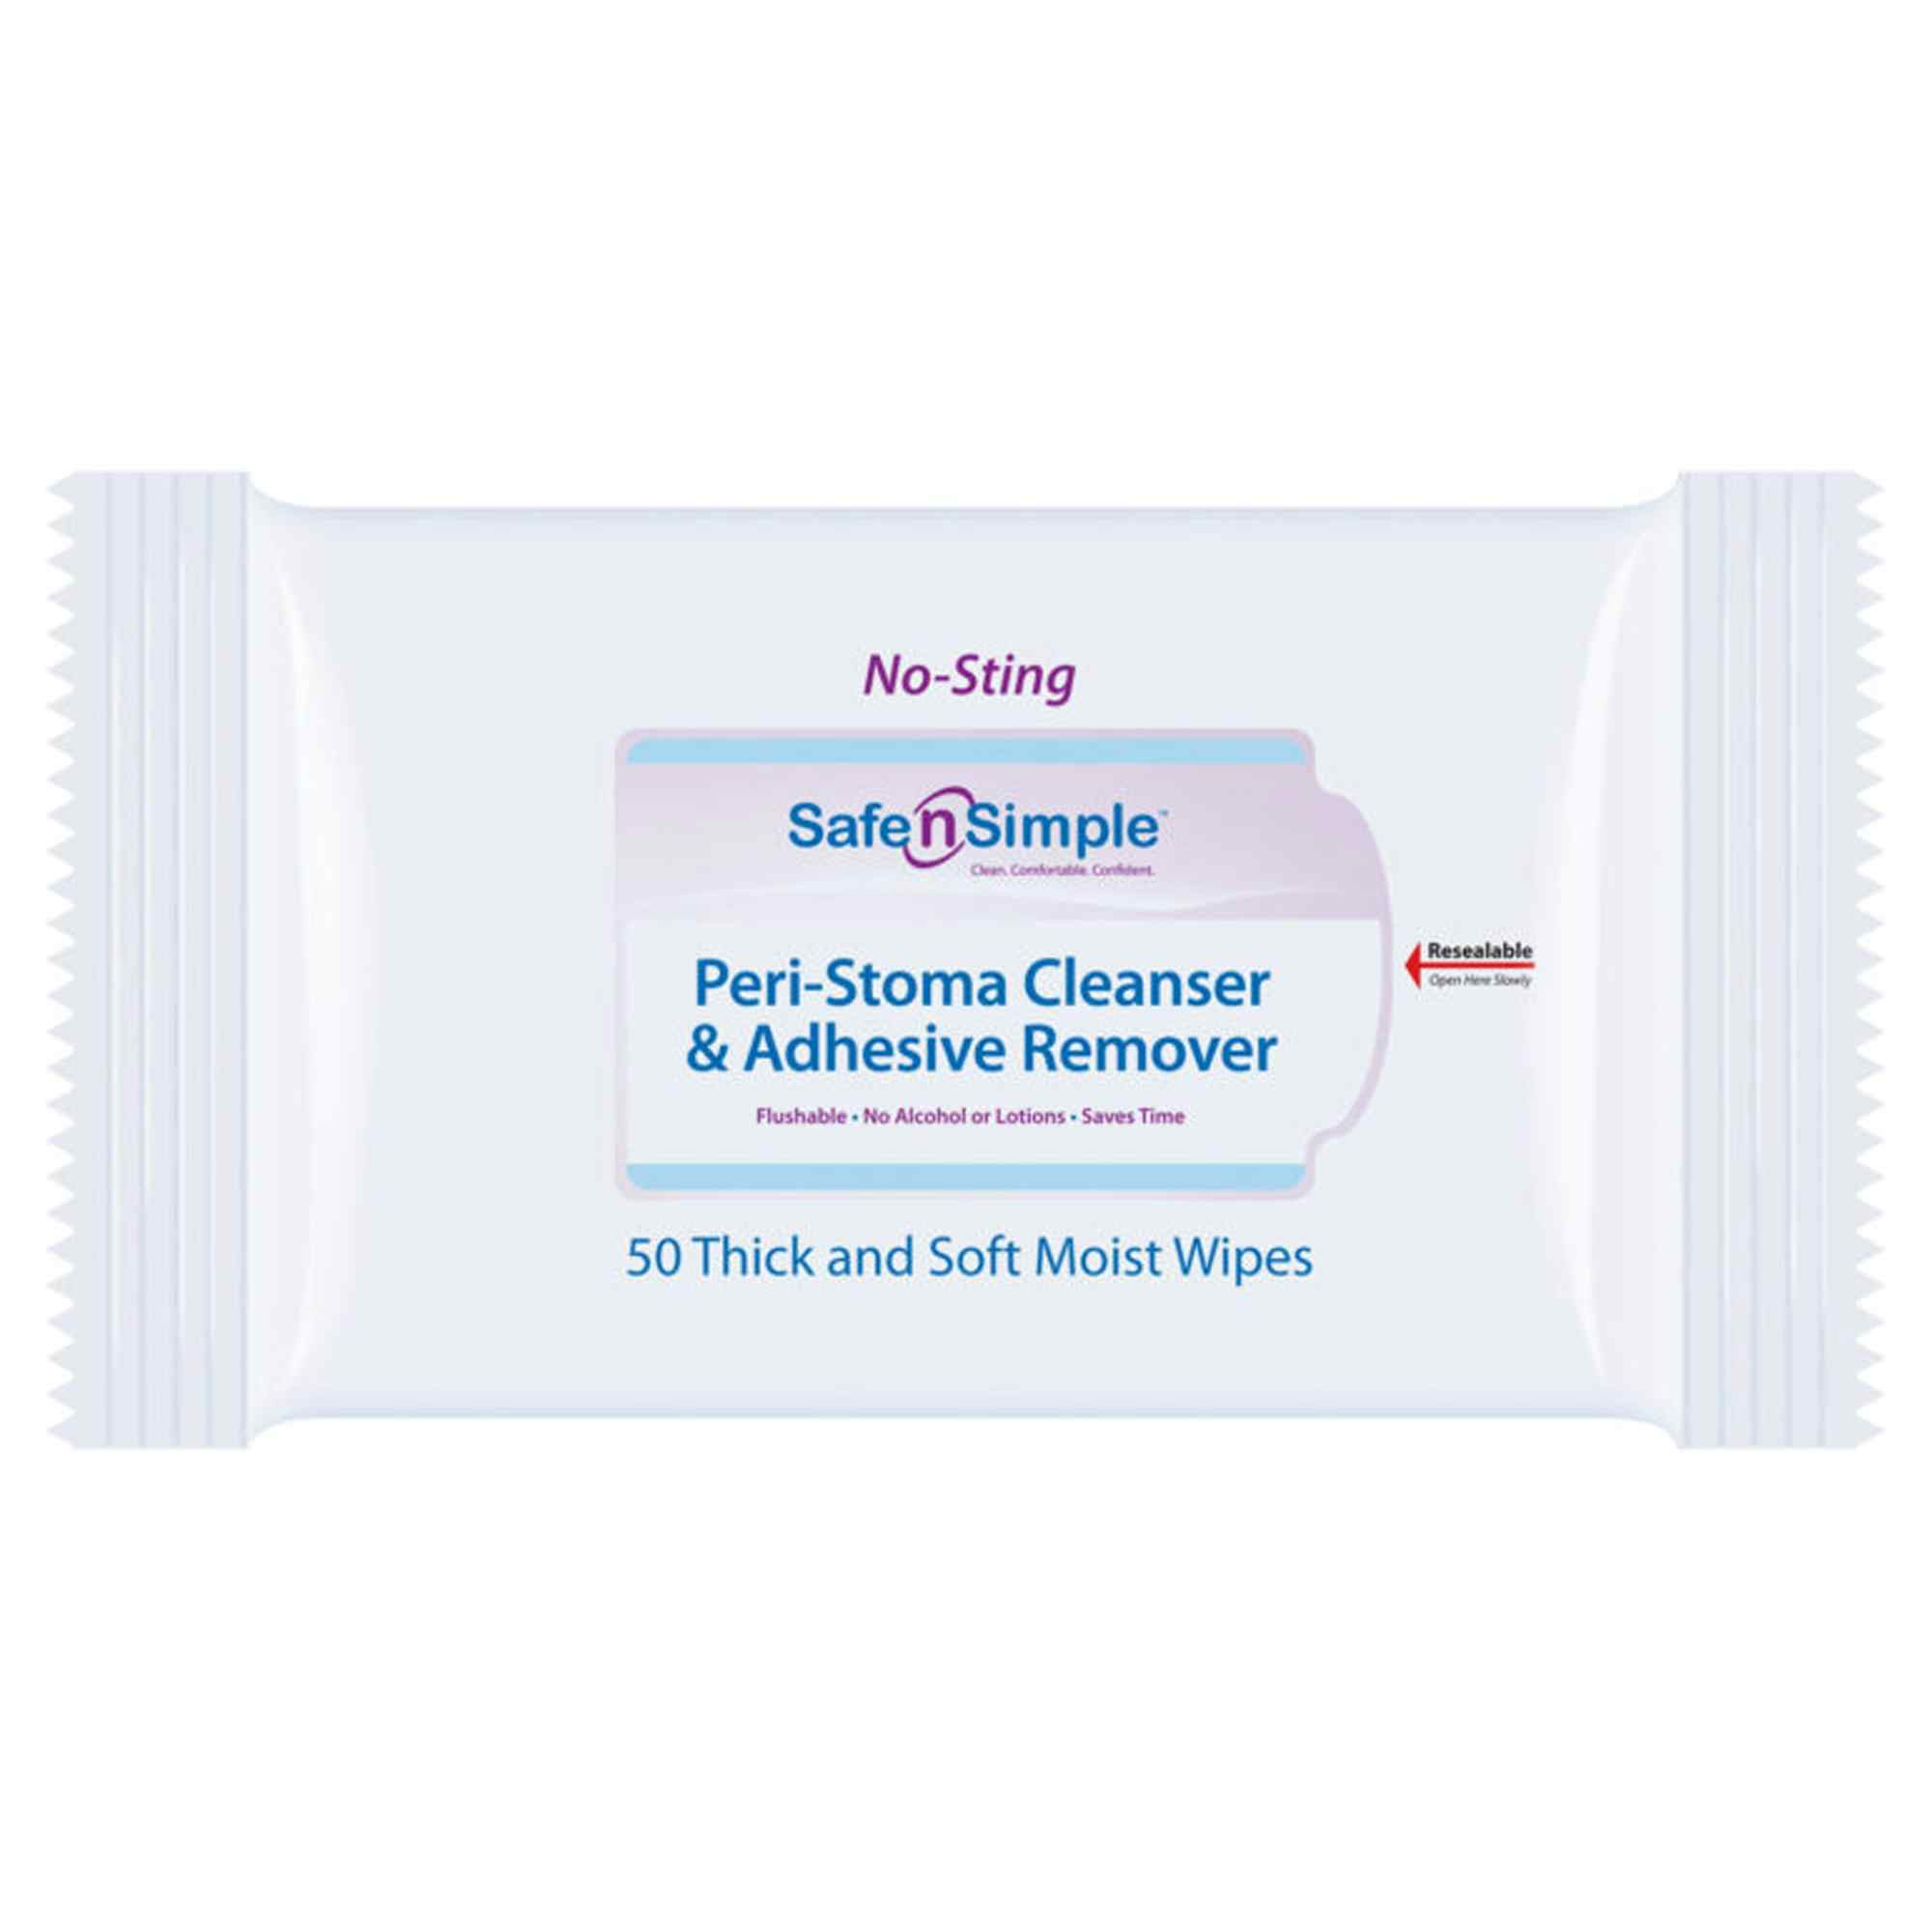 Safe n Simple Peri-Stoma Cleanser & Adhesive Remover Wipes, SNS00525, Pack of 50